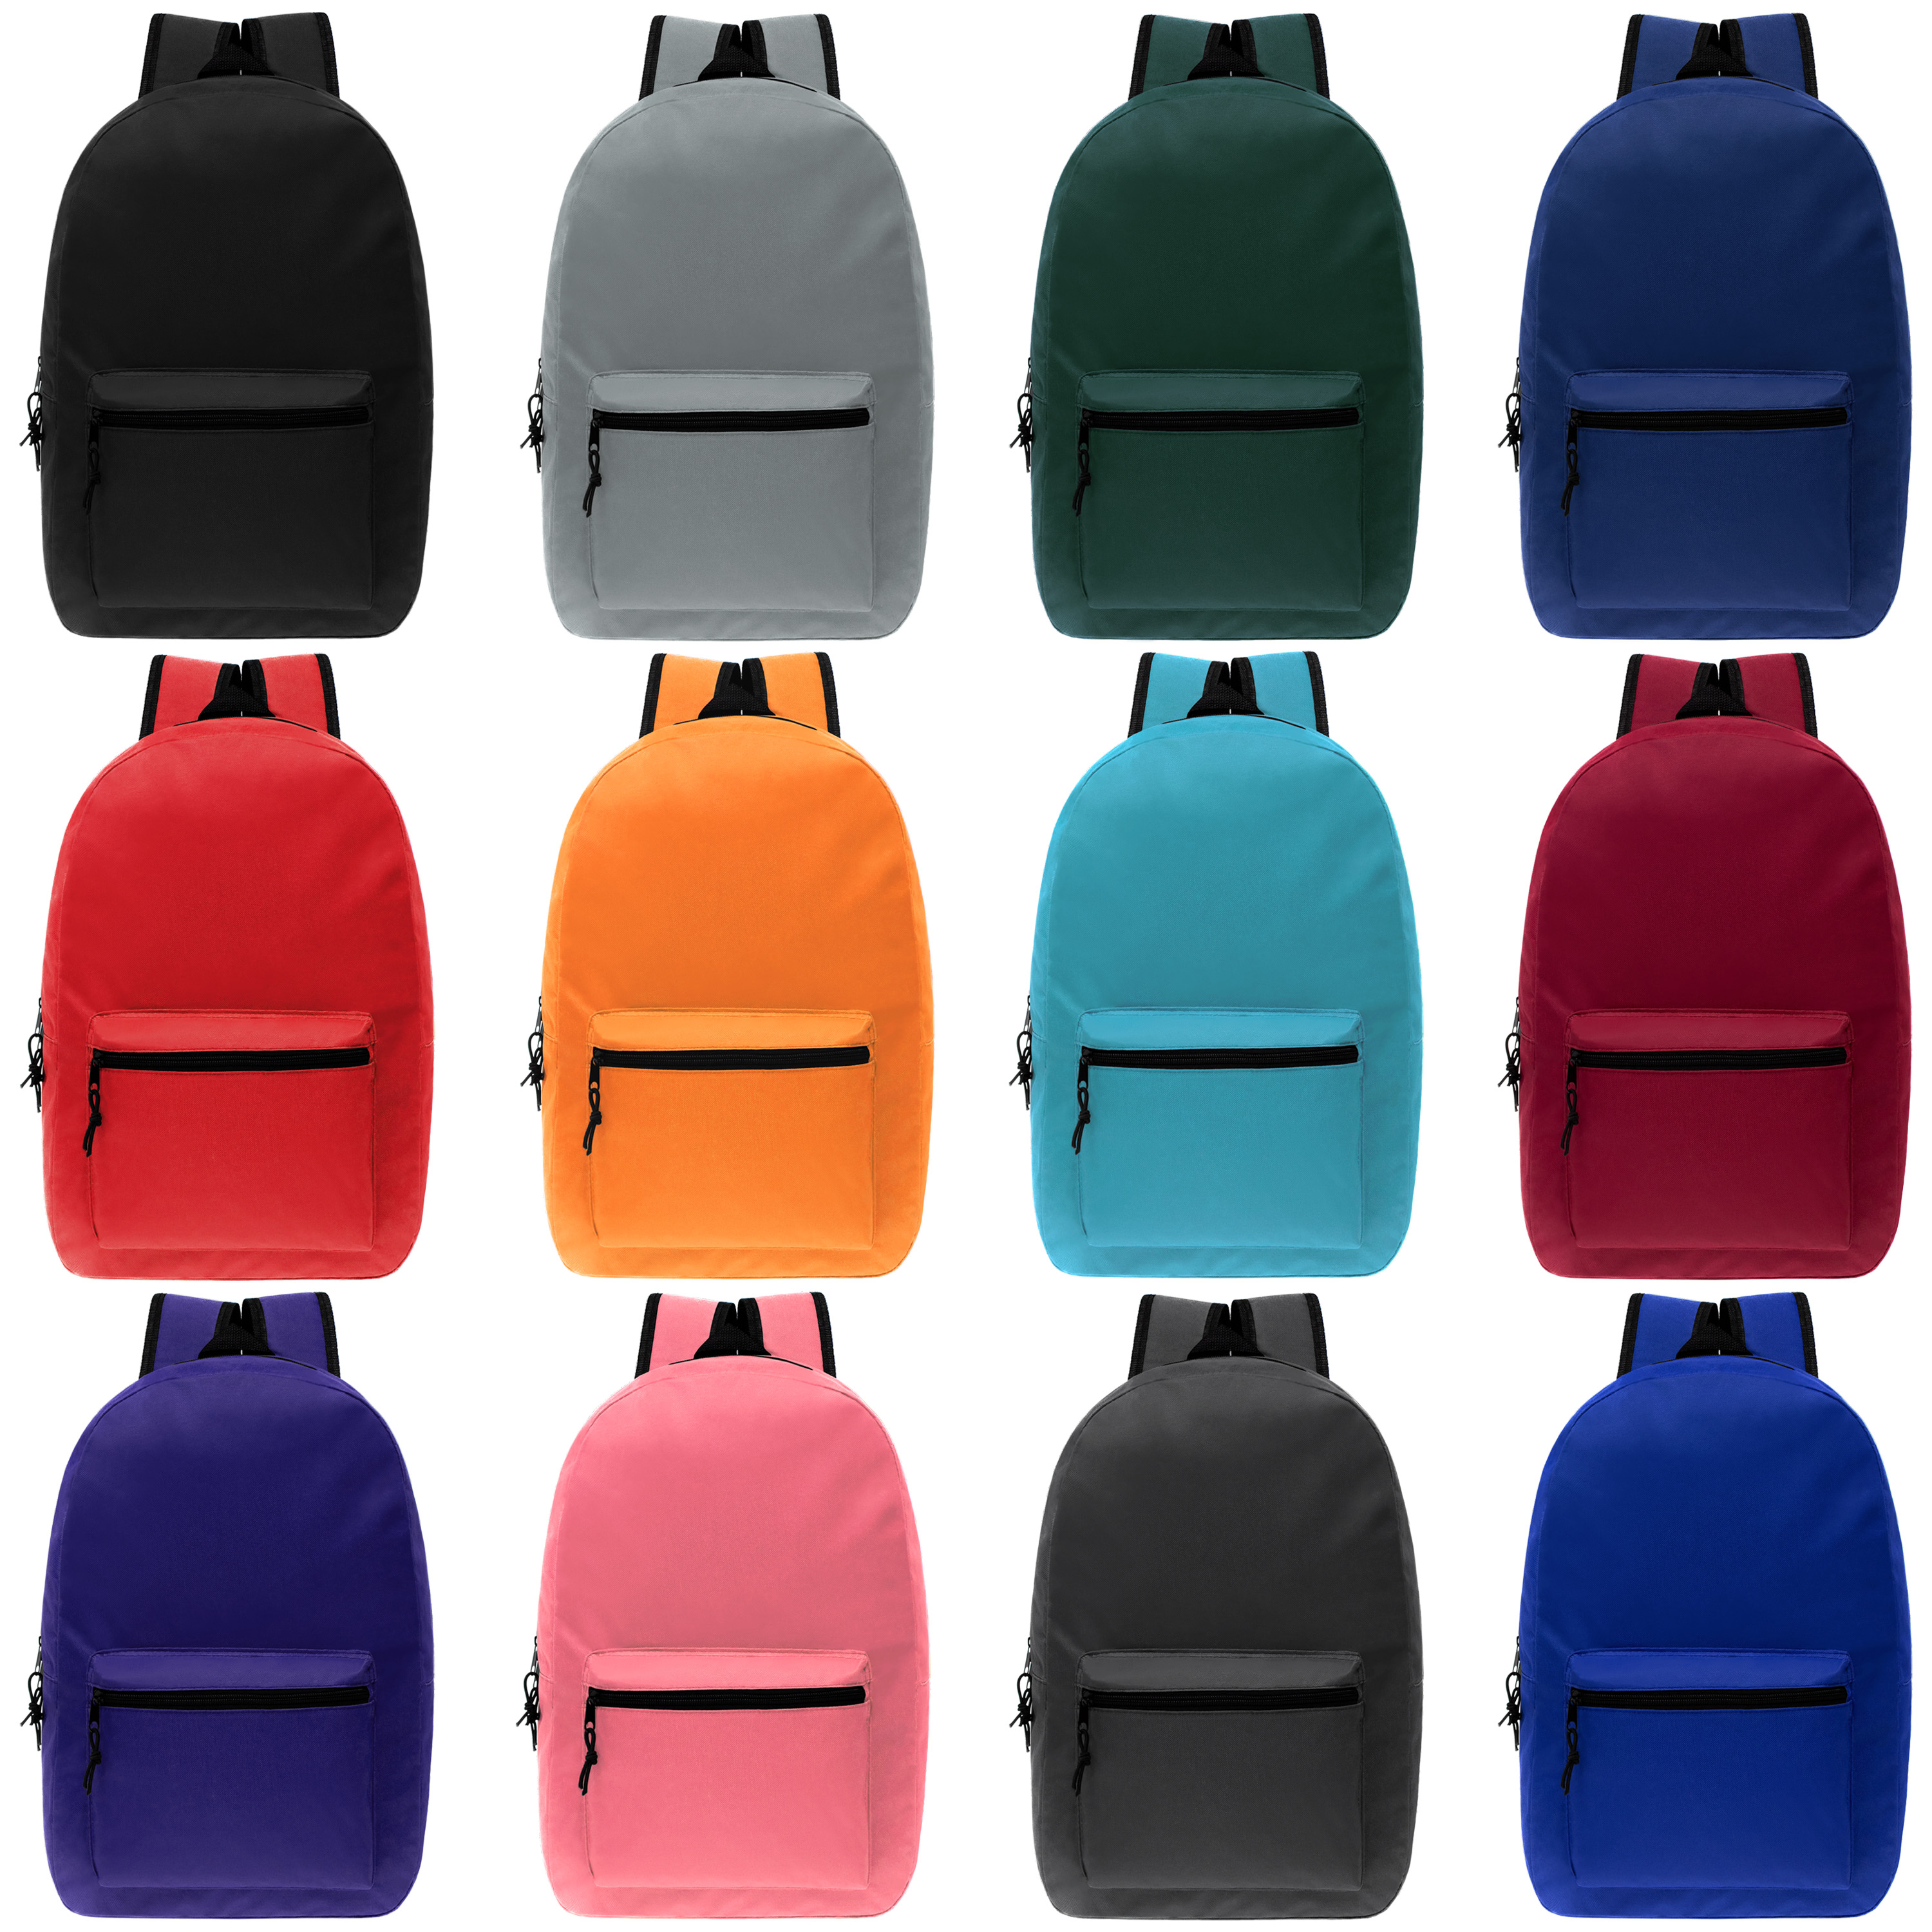 ''15'''' Lightweight Classic Style BACKPACKs w/ Adjustable Padded Straps - Neon & Assorted Colors''